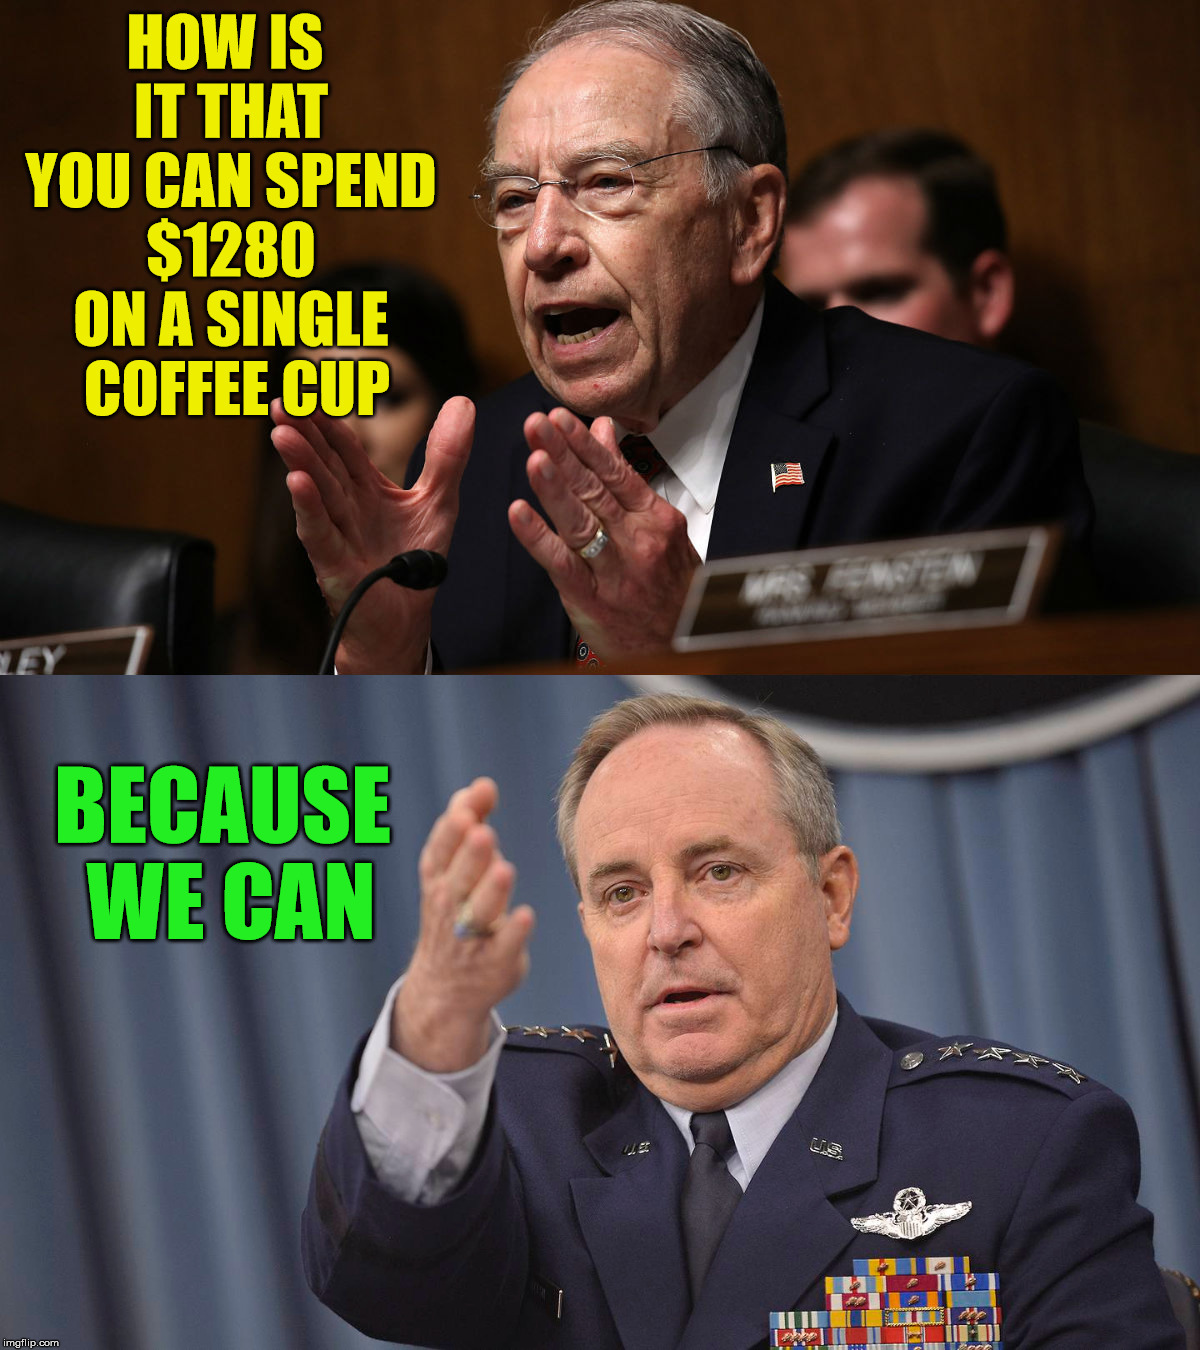 That moment when it's pointed out your budget is bigger than your needs. | HOW IS IT THAT YOU CAN SPEND  $1280  ON A SINGLE  COFFEE CUP; BECAUSE WE CAN | image tagged in us senate,usaf,budget,wasteful spending | made w/ Imgflip meme maker